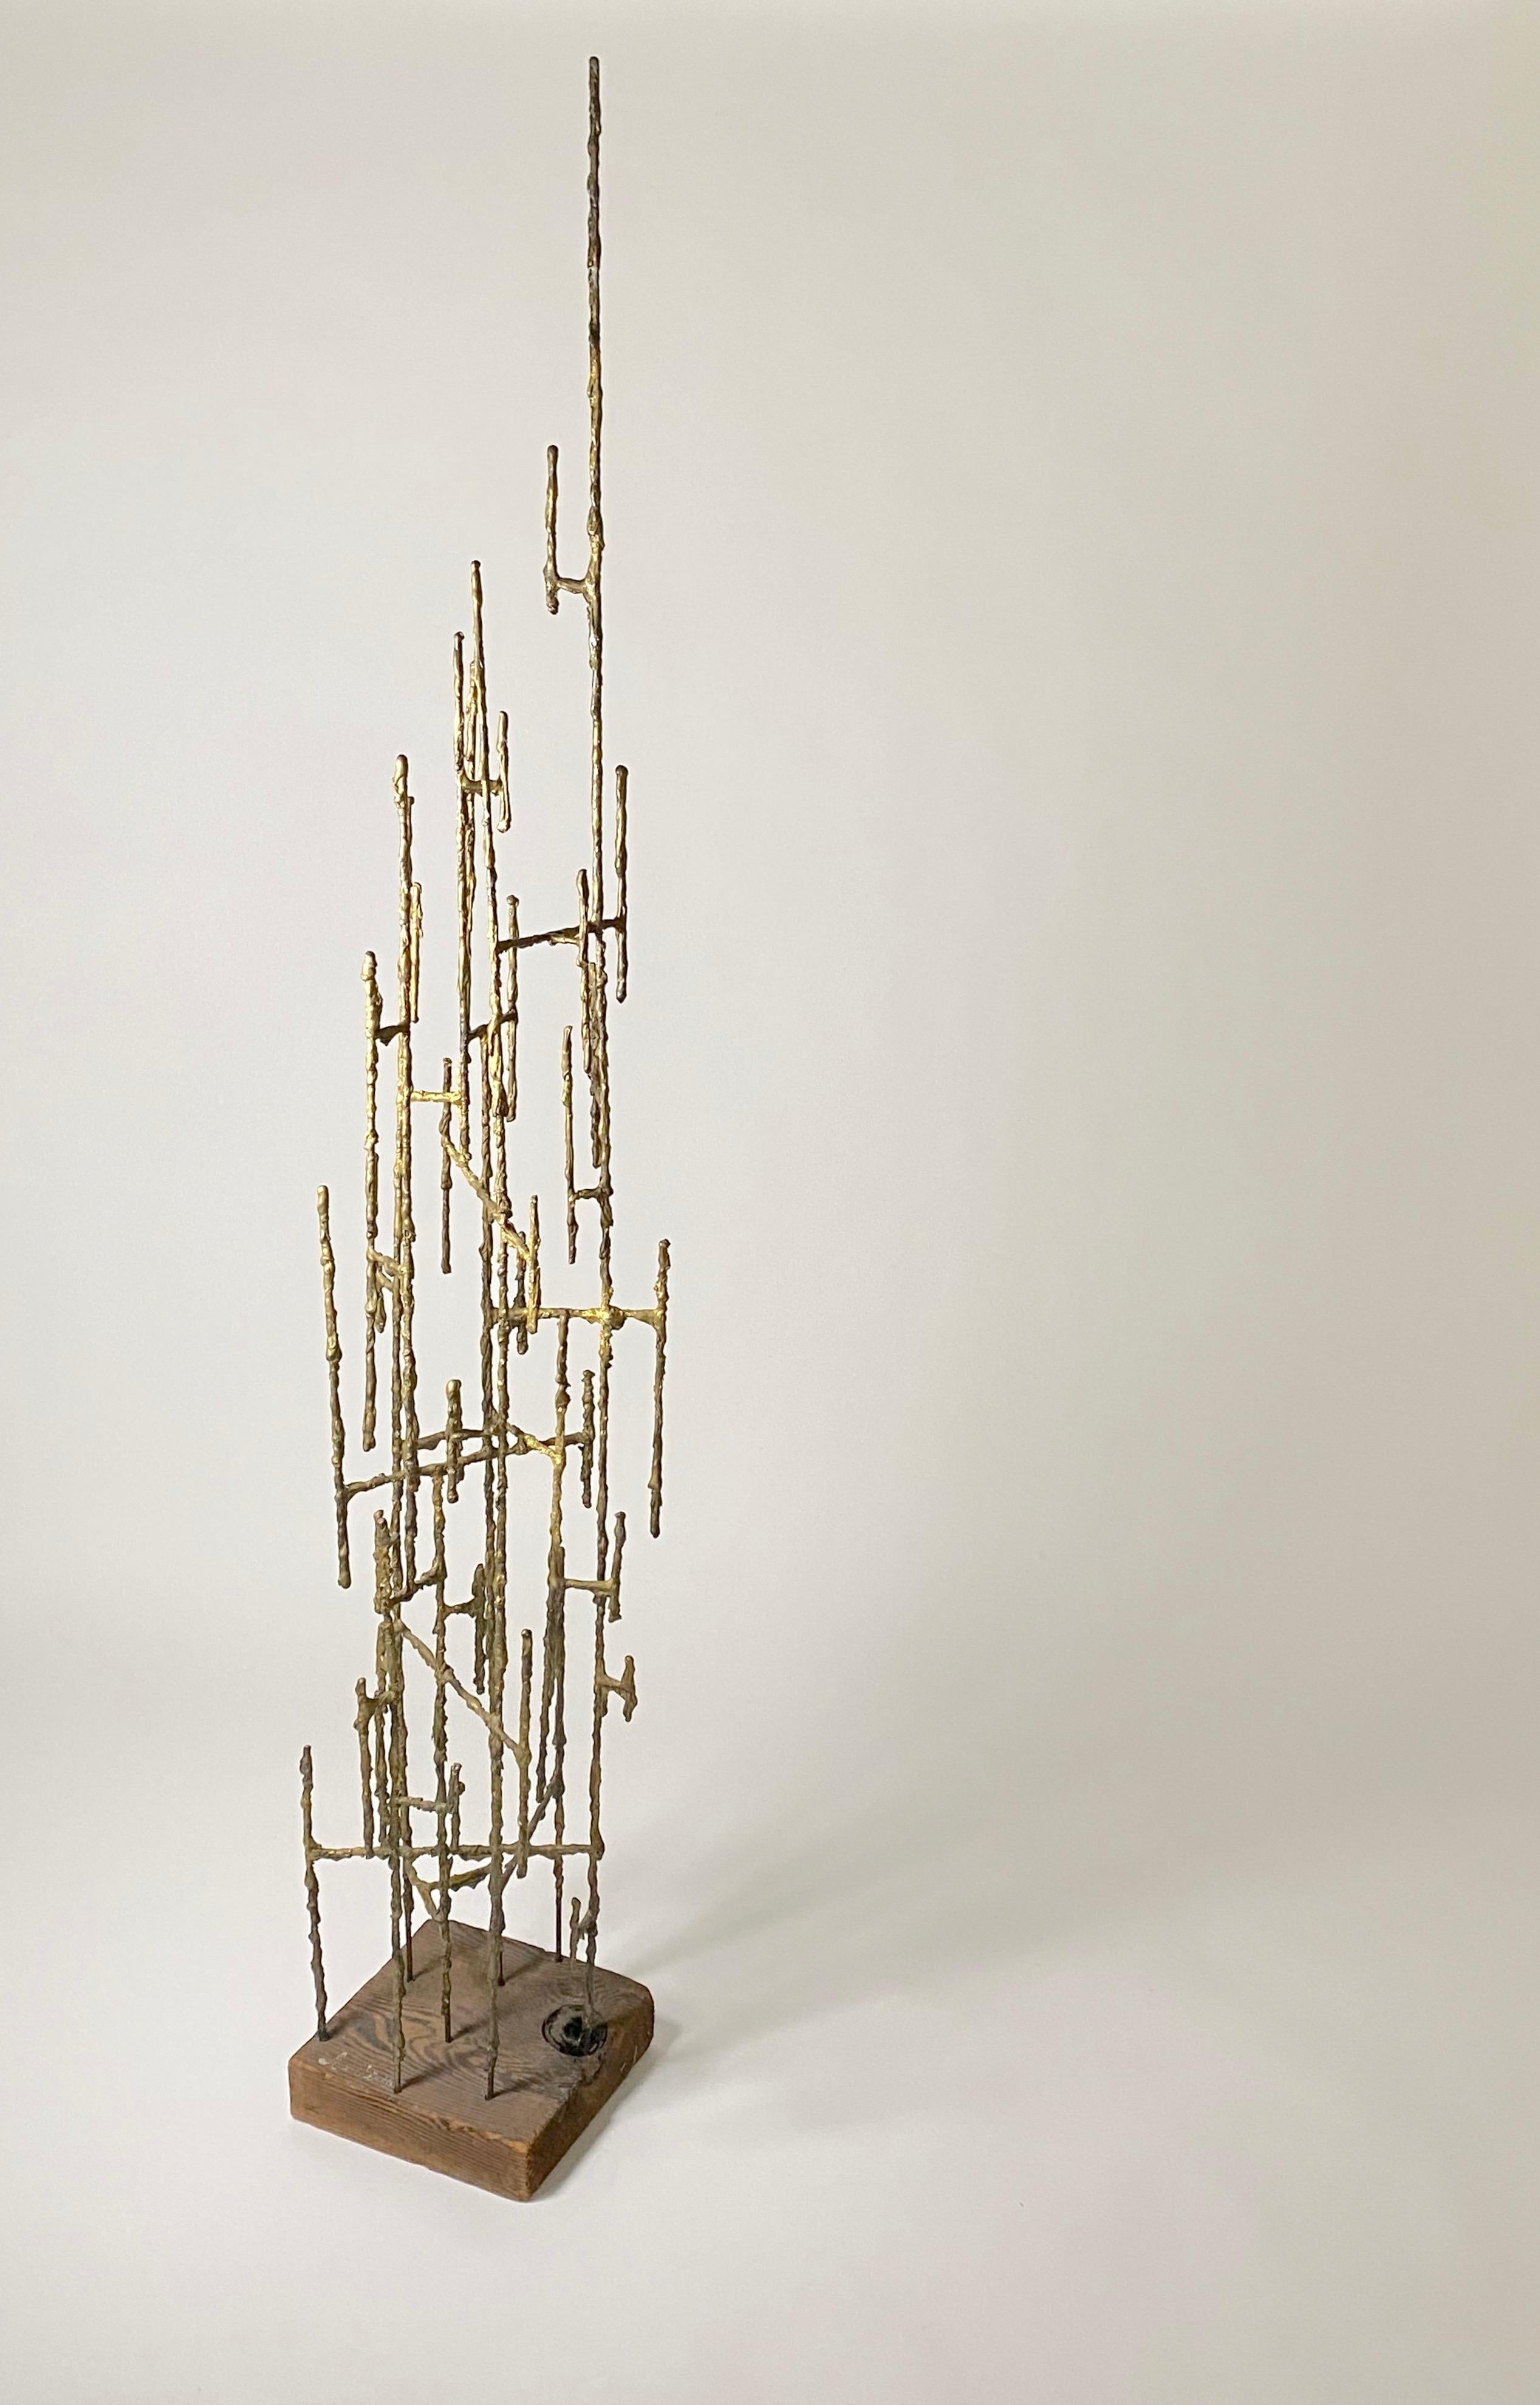 81 inches tall, Abstract floor sculpture in welded metal with a resin outer drip coating in a soft bronze / gold color on a wooden plinth base. The work has the organic aesthetic similar to the work of Harry Bertoia's, signed by the artist, but it